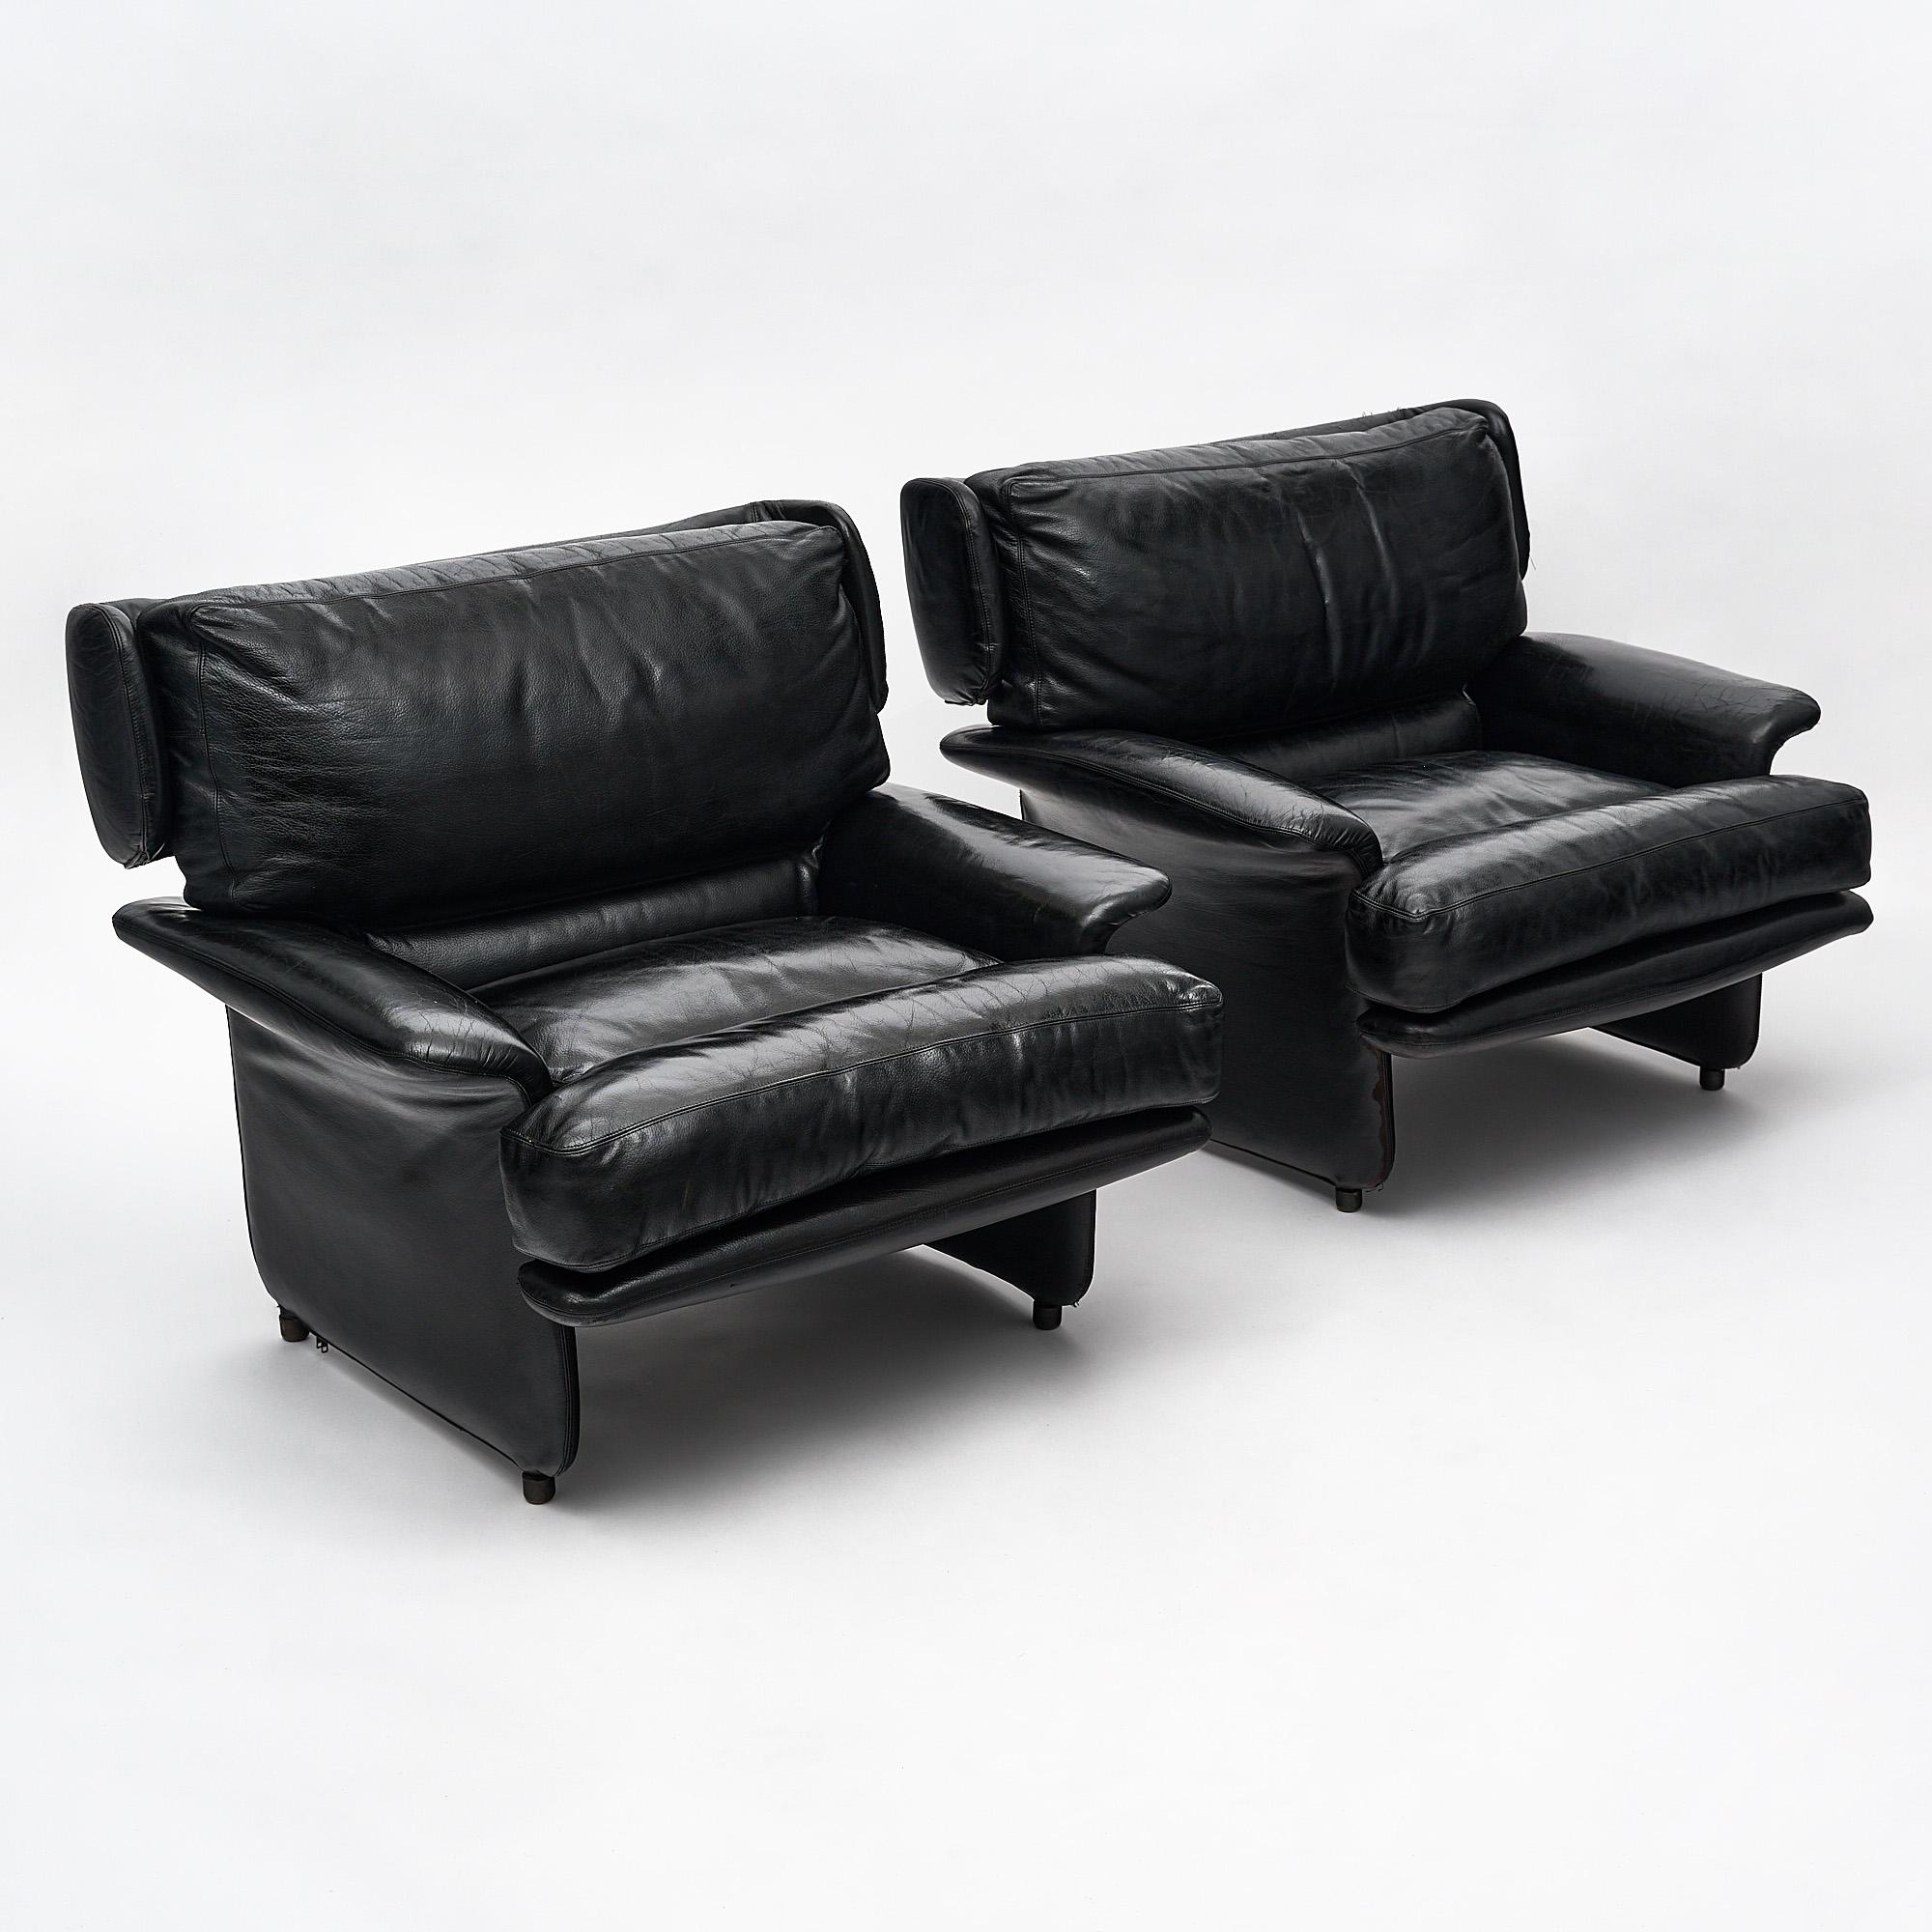 Vintage armchairs, Italian, by Saporiti. This pair is made of black leather and in excellent vintage condition. They are very comfortable and add impact to any space.